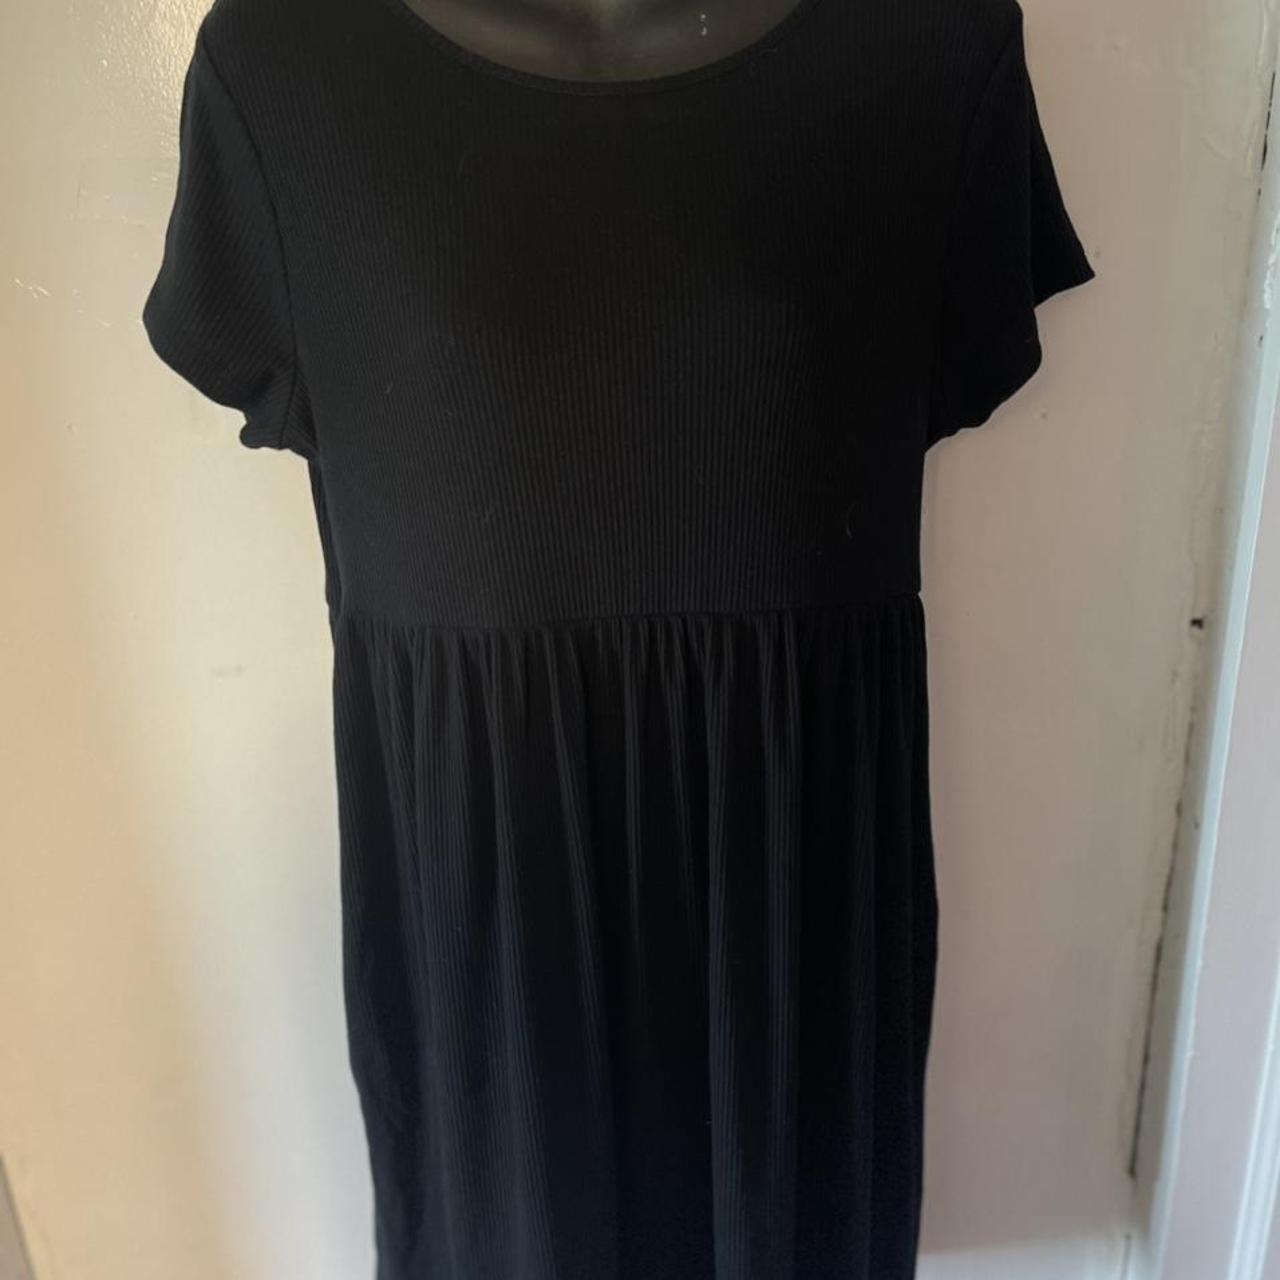 Wild Fable black ribbed dress. Worn maybe once, this... - Depop